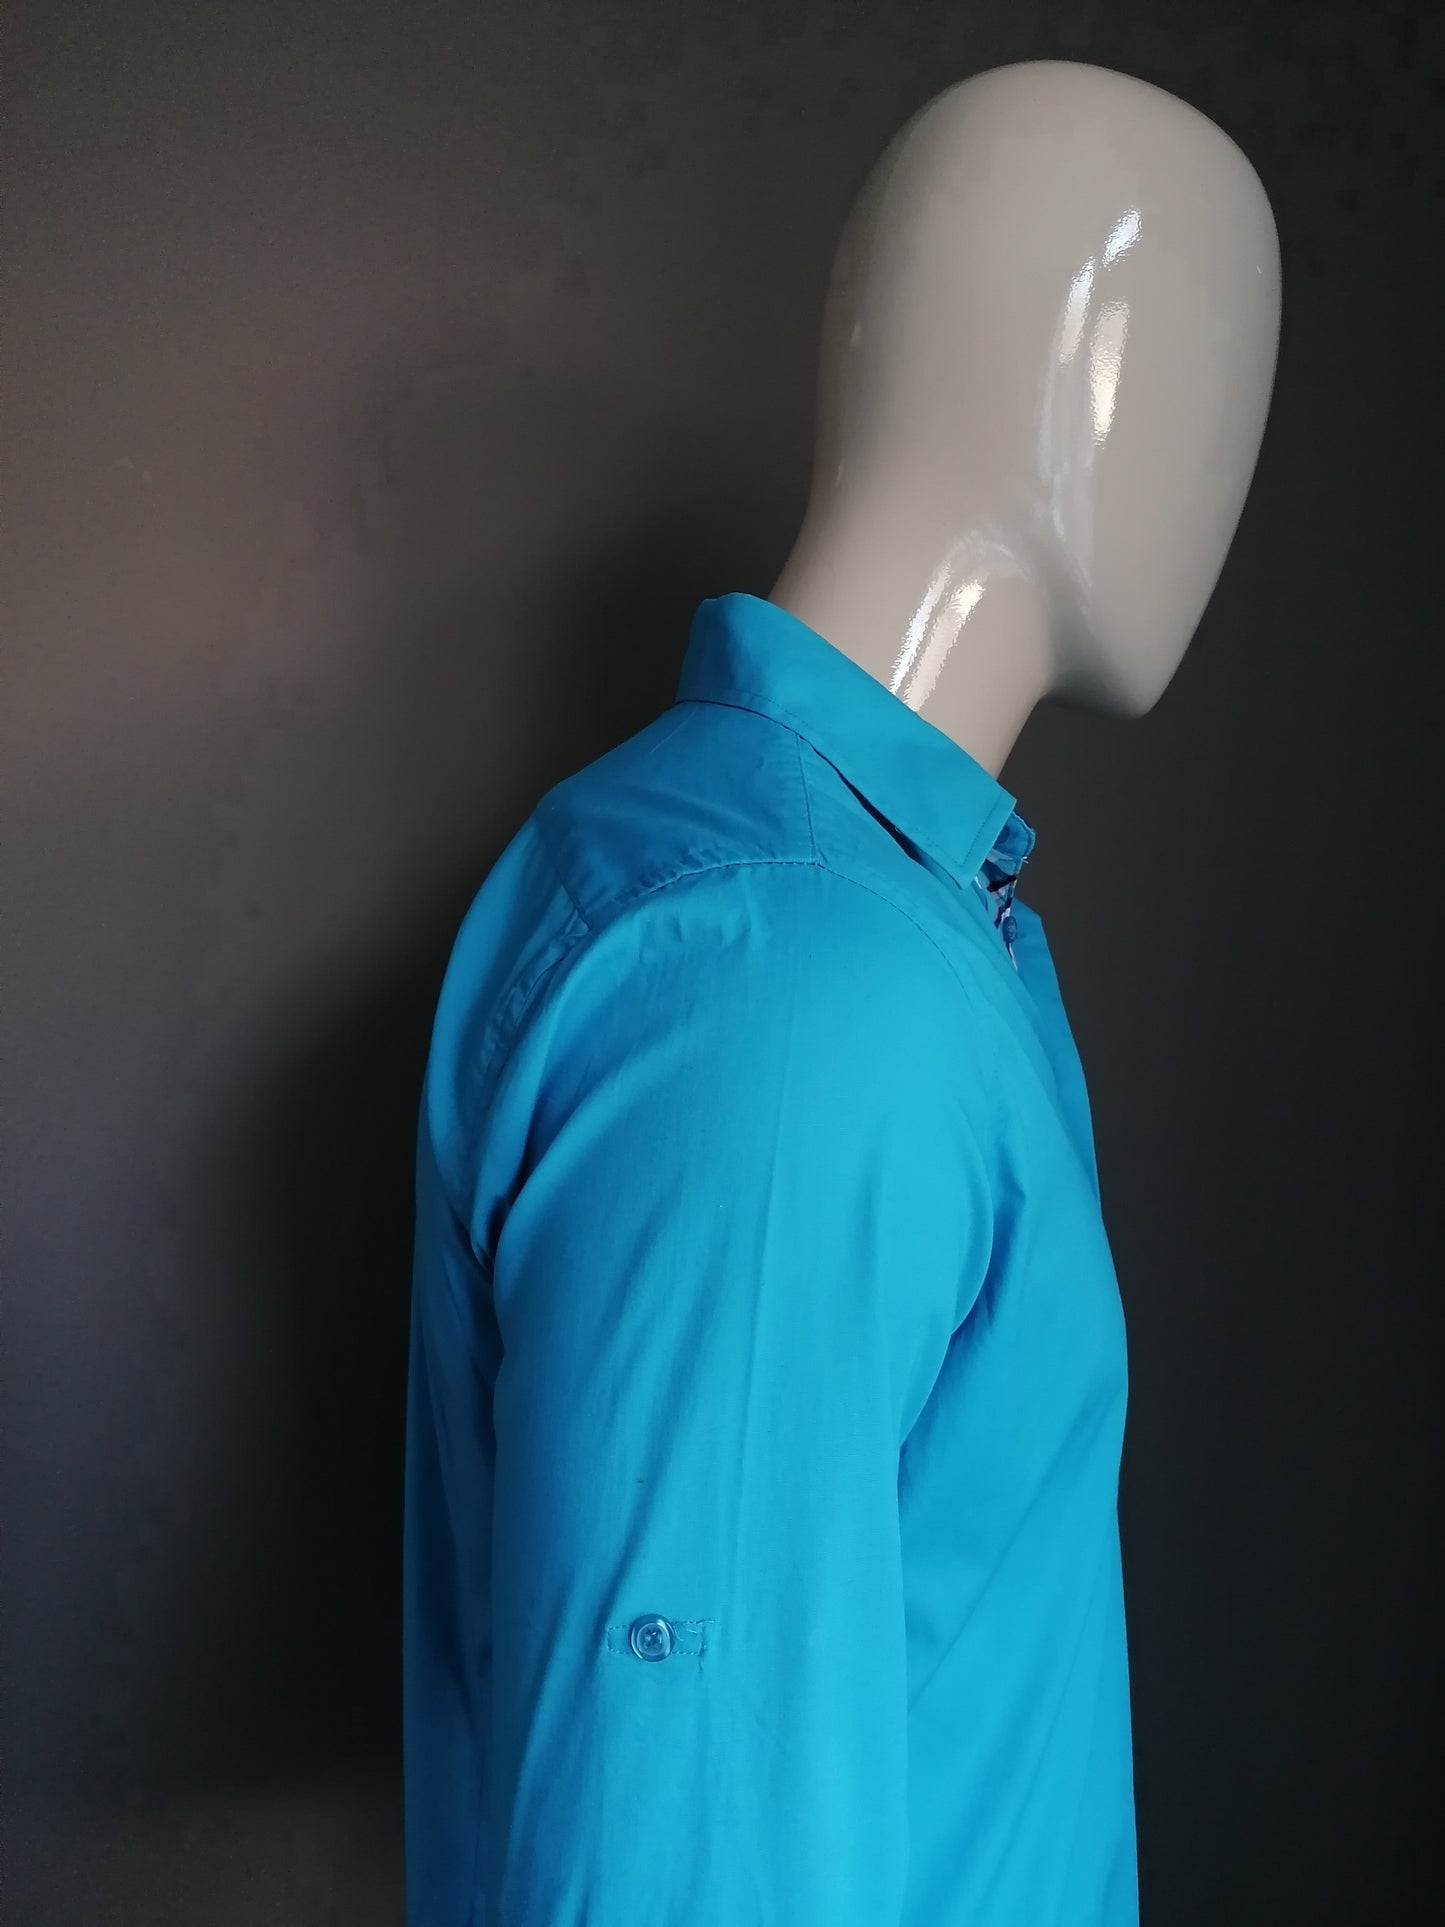 Red Tag overhemd. Blauw gekleurd. Maat M. Fitted stretch